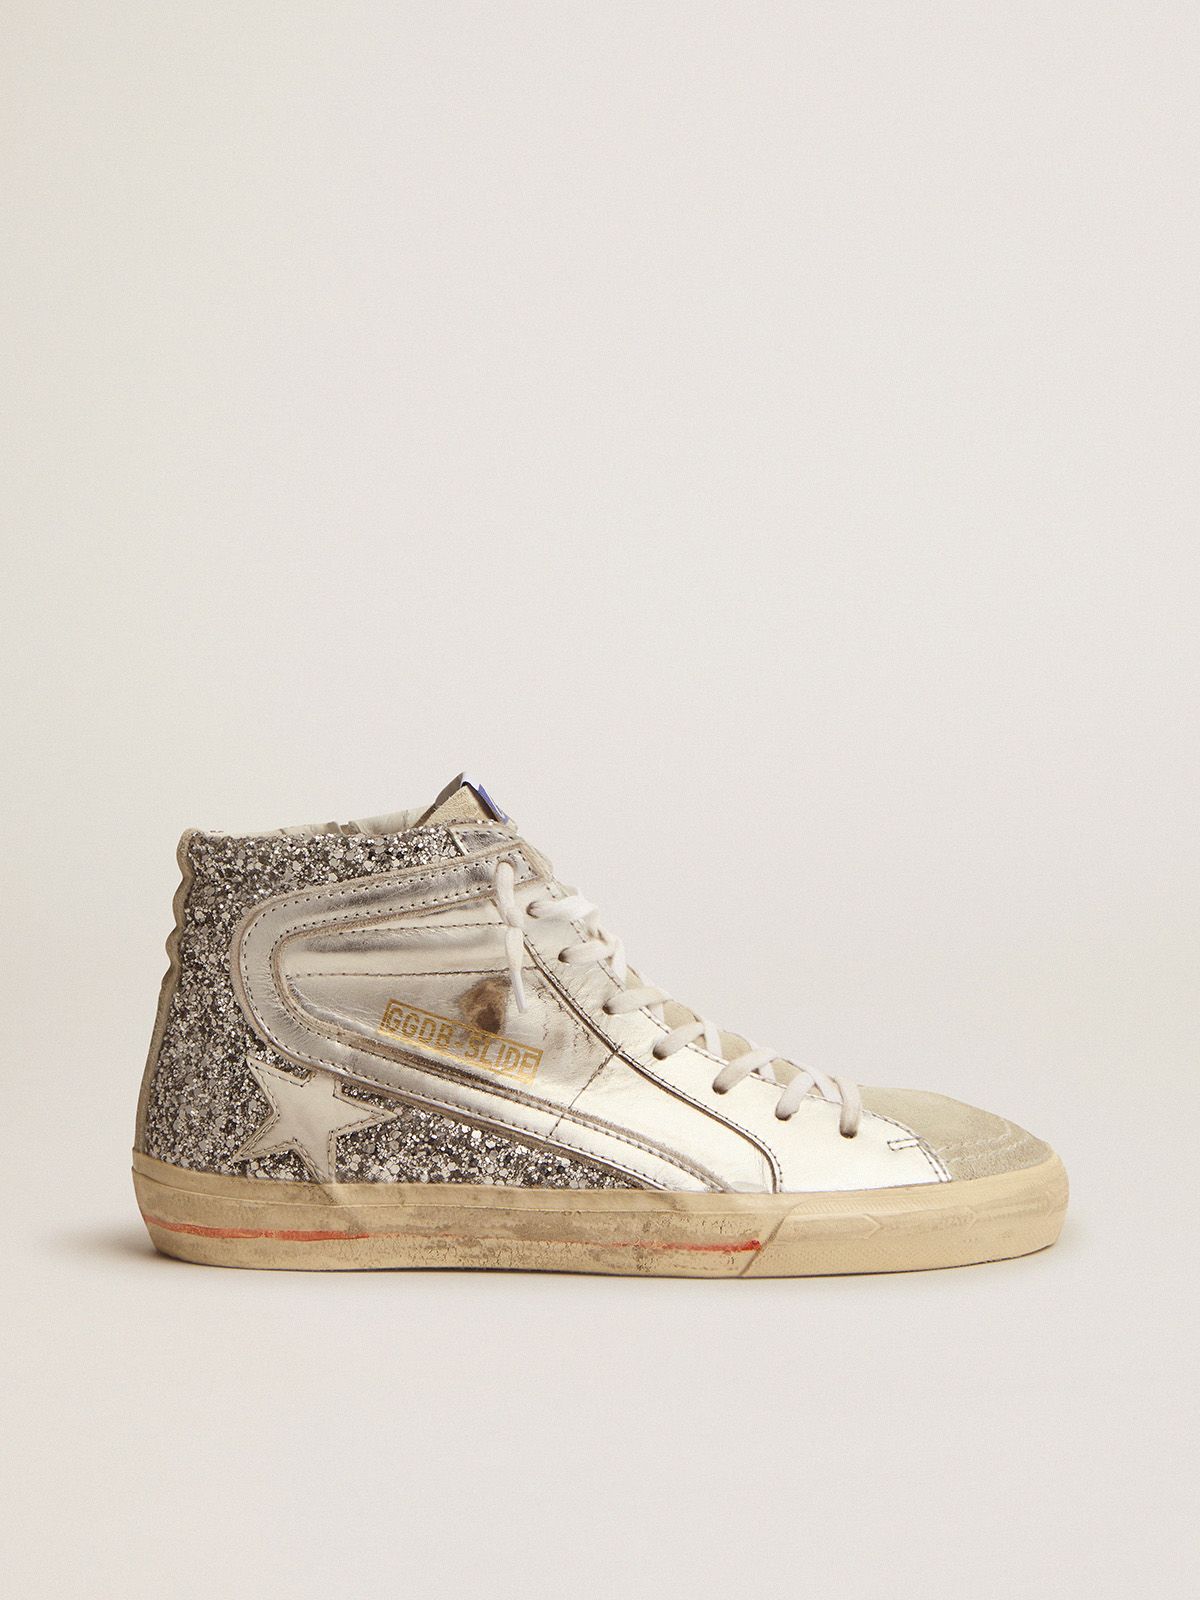 Golden Goose Bambina Slide sneakers with upper in laminated leather and silver glitter